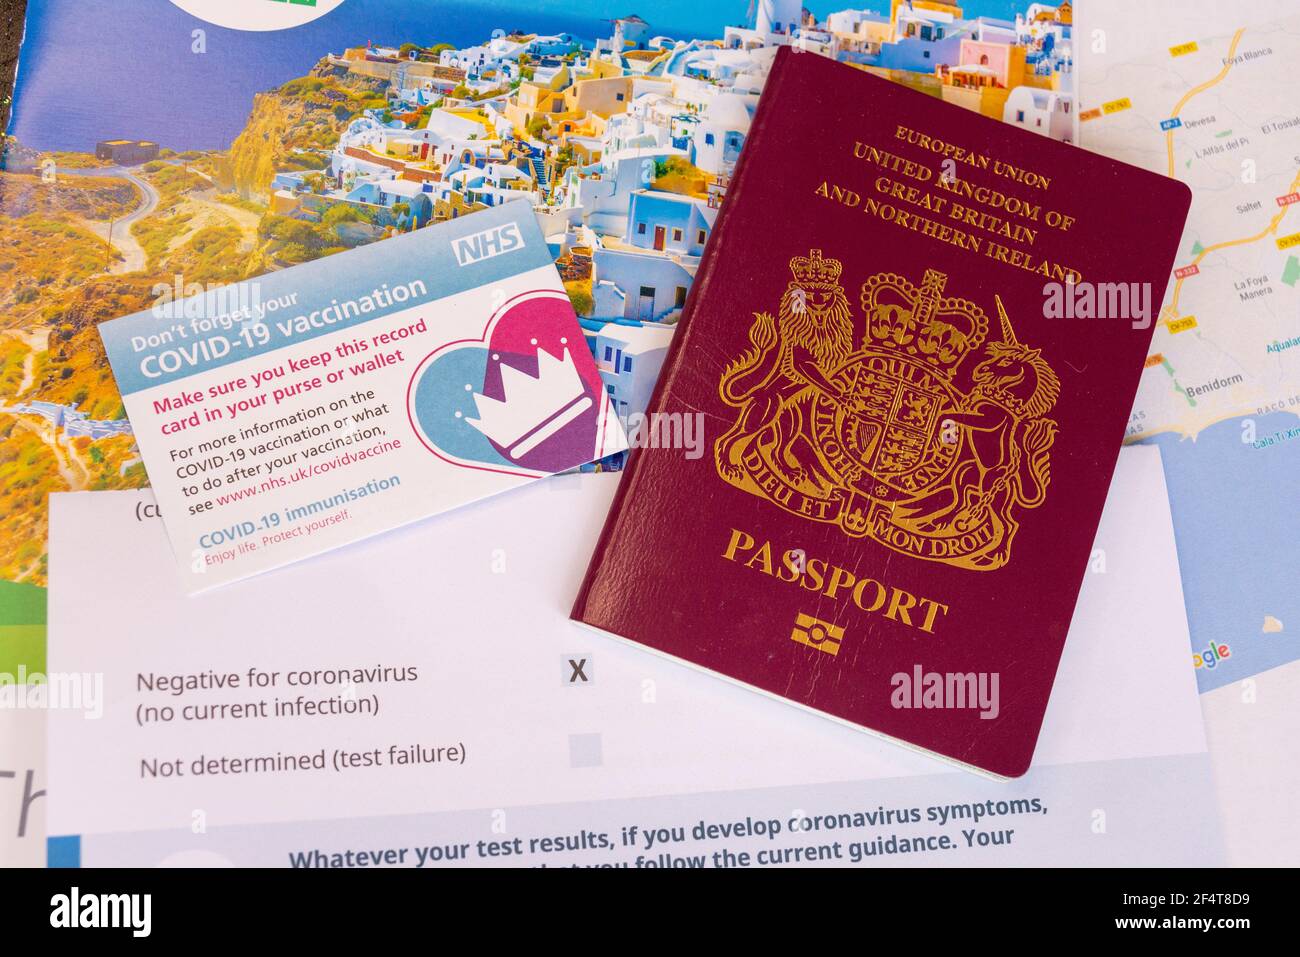 UK COVID 19 vaccine travel passport concept, with NHS vaccination record card, UK EU passport, negative test result, holiday brochure and Spain map Stock Photo